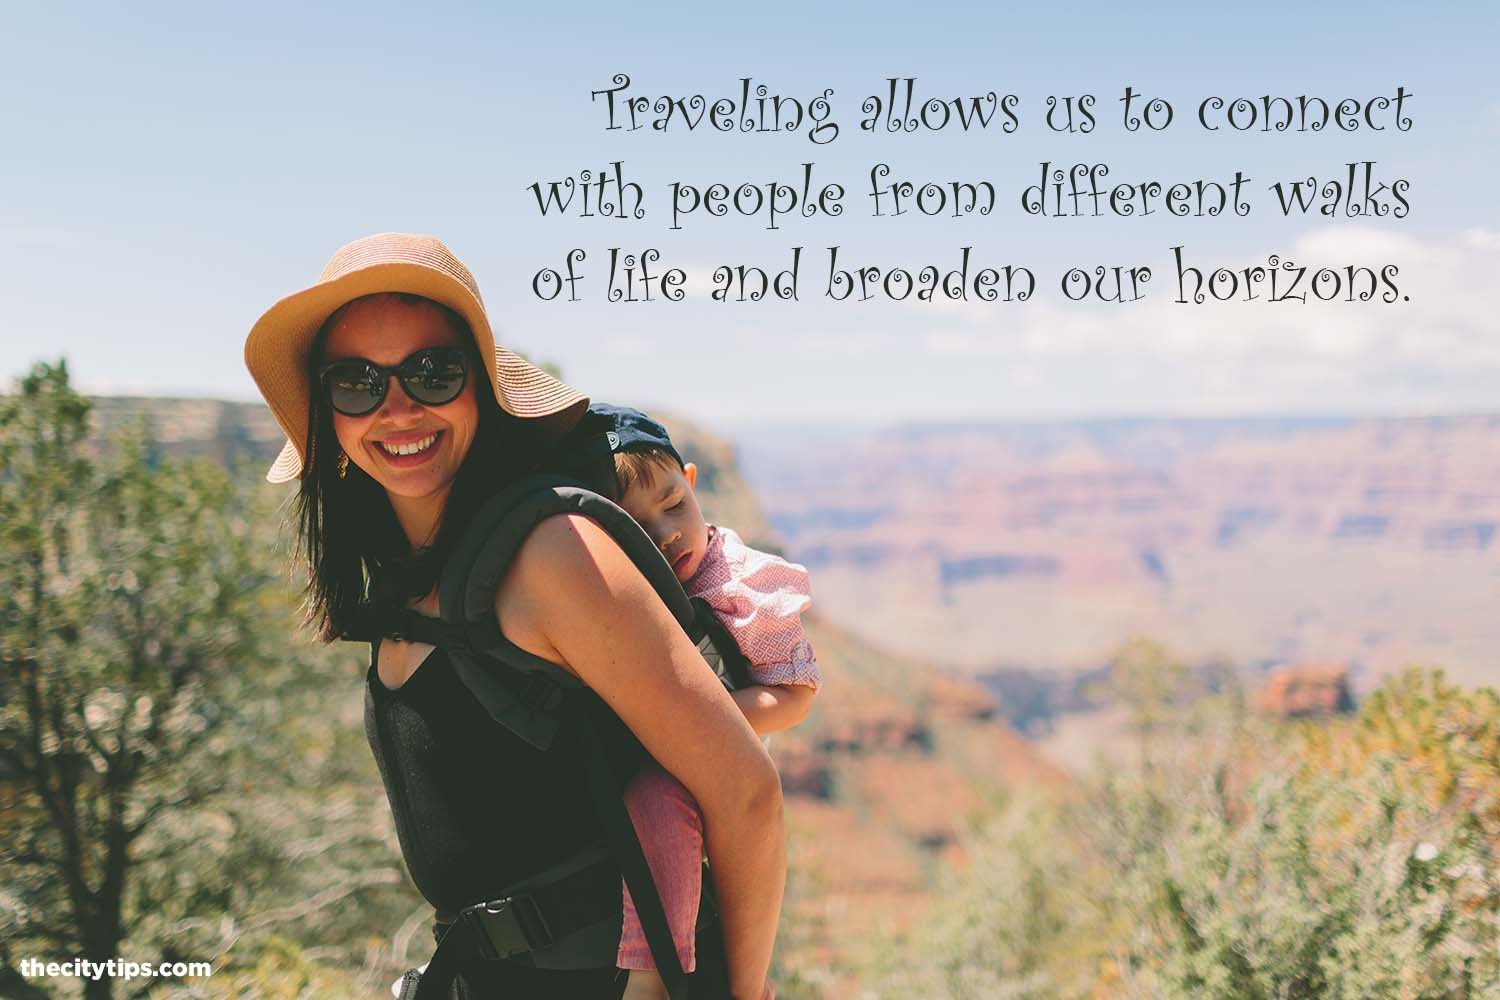 "Traveling allows us to connect with people from different walks of life and broaden our horizons." by Anonymous